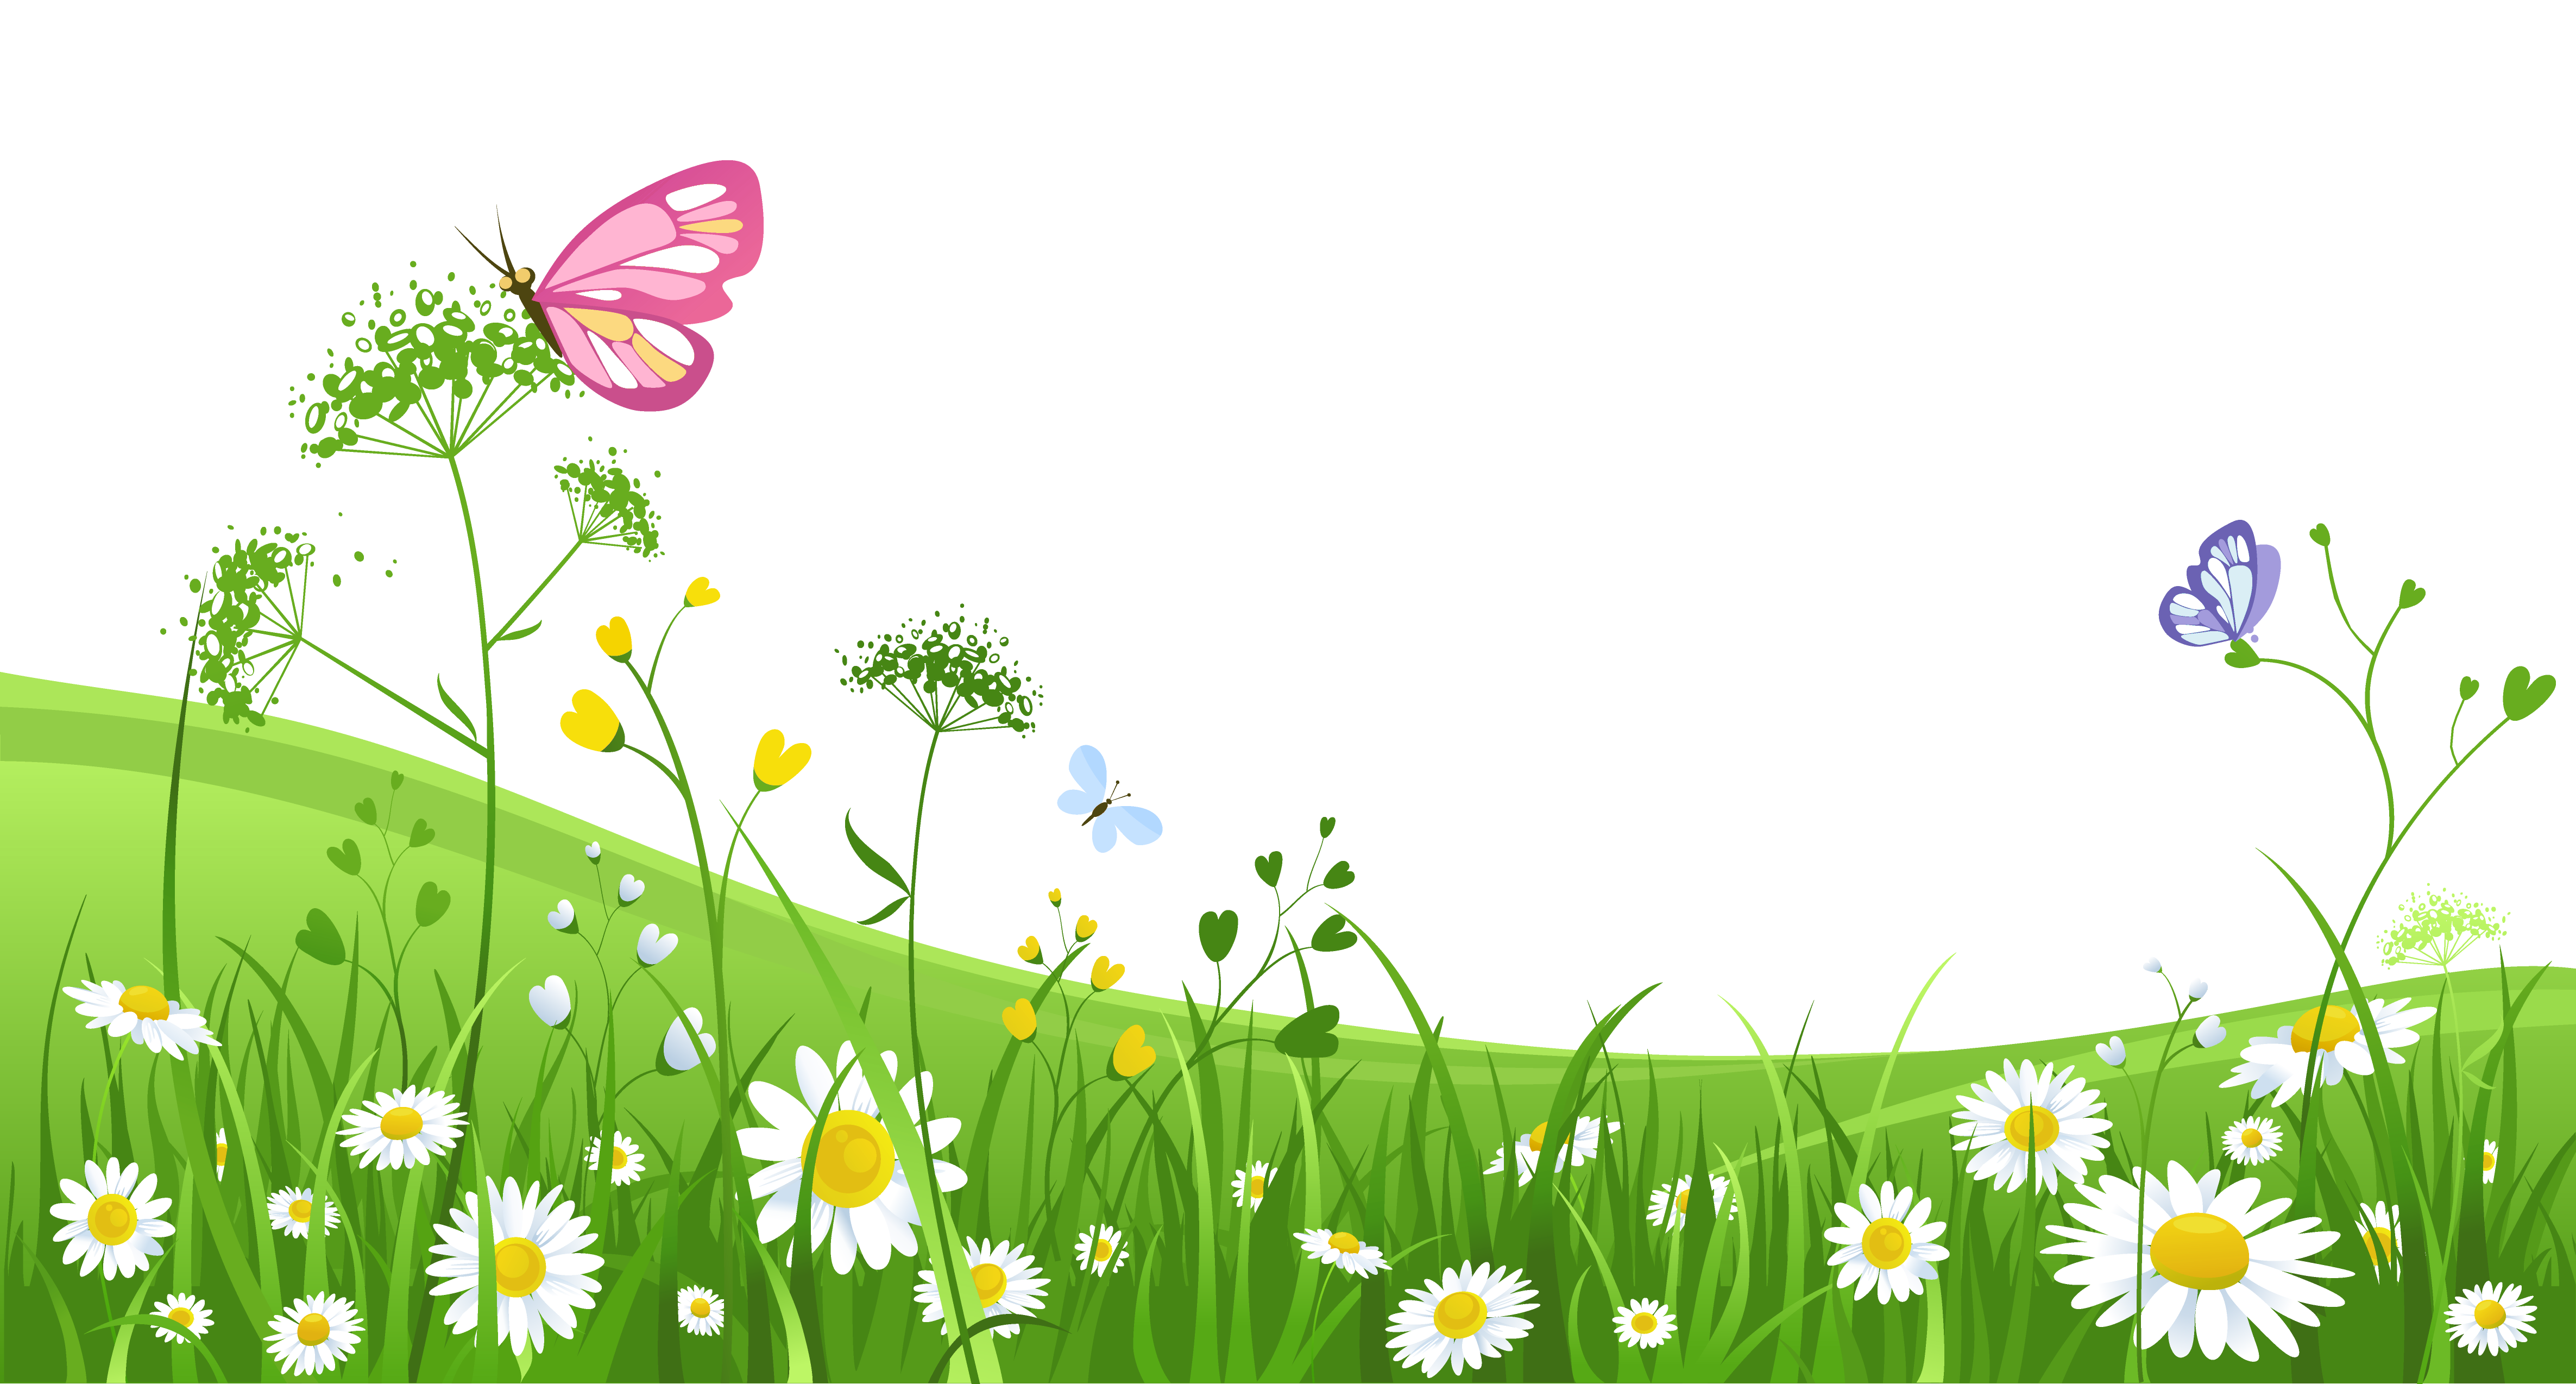 Grass with flowers background clipart free